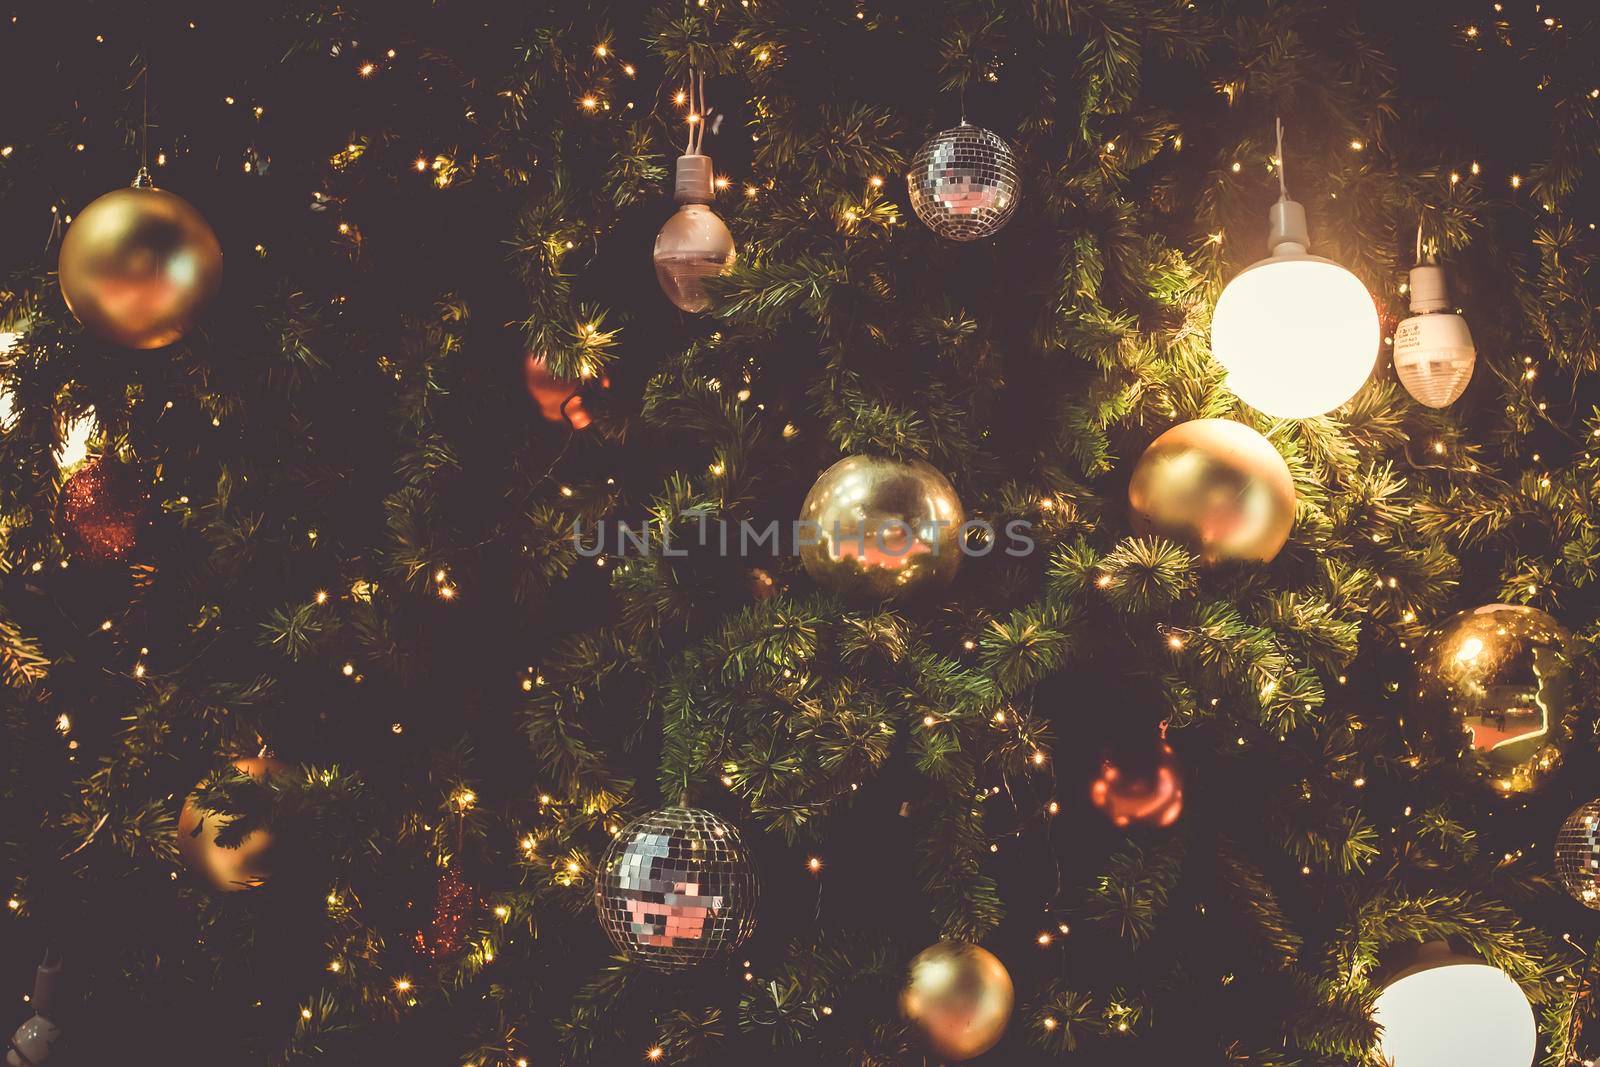 Decorated Christmas tree on blurred varicolored new year's background  . Christmas Ornament On Wooden Background With Snowflakes, Greeting card Merry Christmas and Happy New Year .